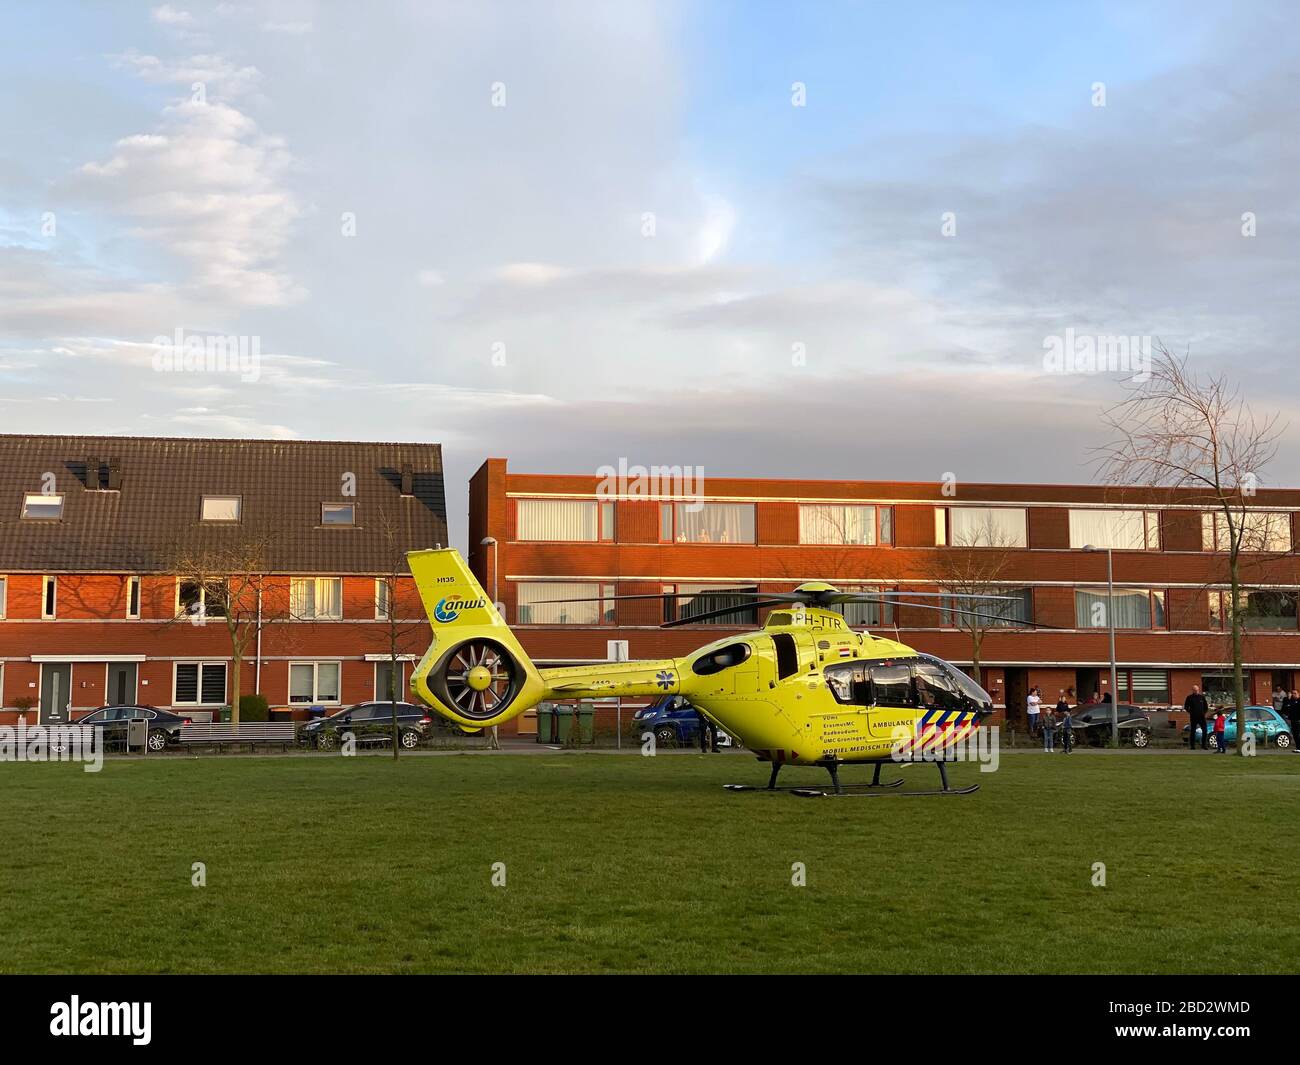 Erasmus MC Medical Center Mobile Team Rescue Chopper yellow ANWB emergency helicopter. Stock Photo